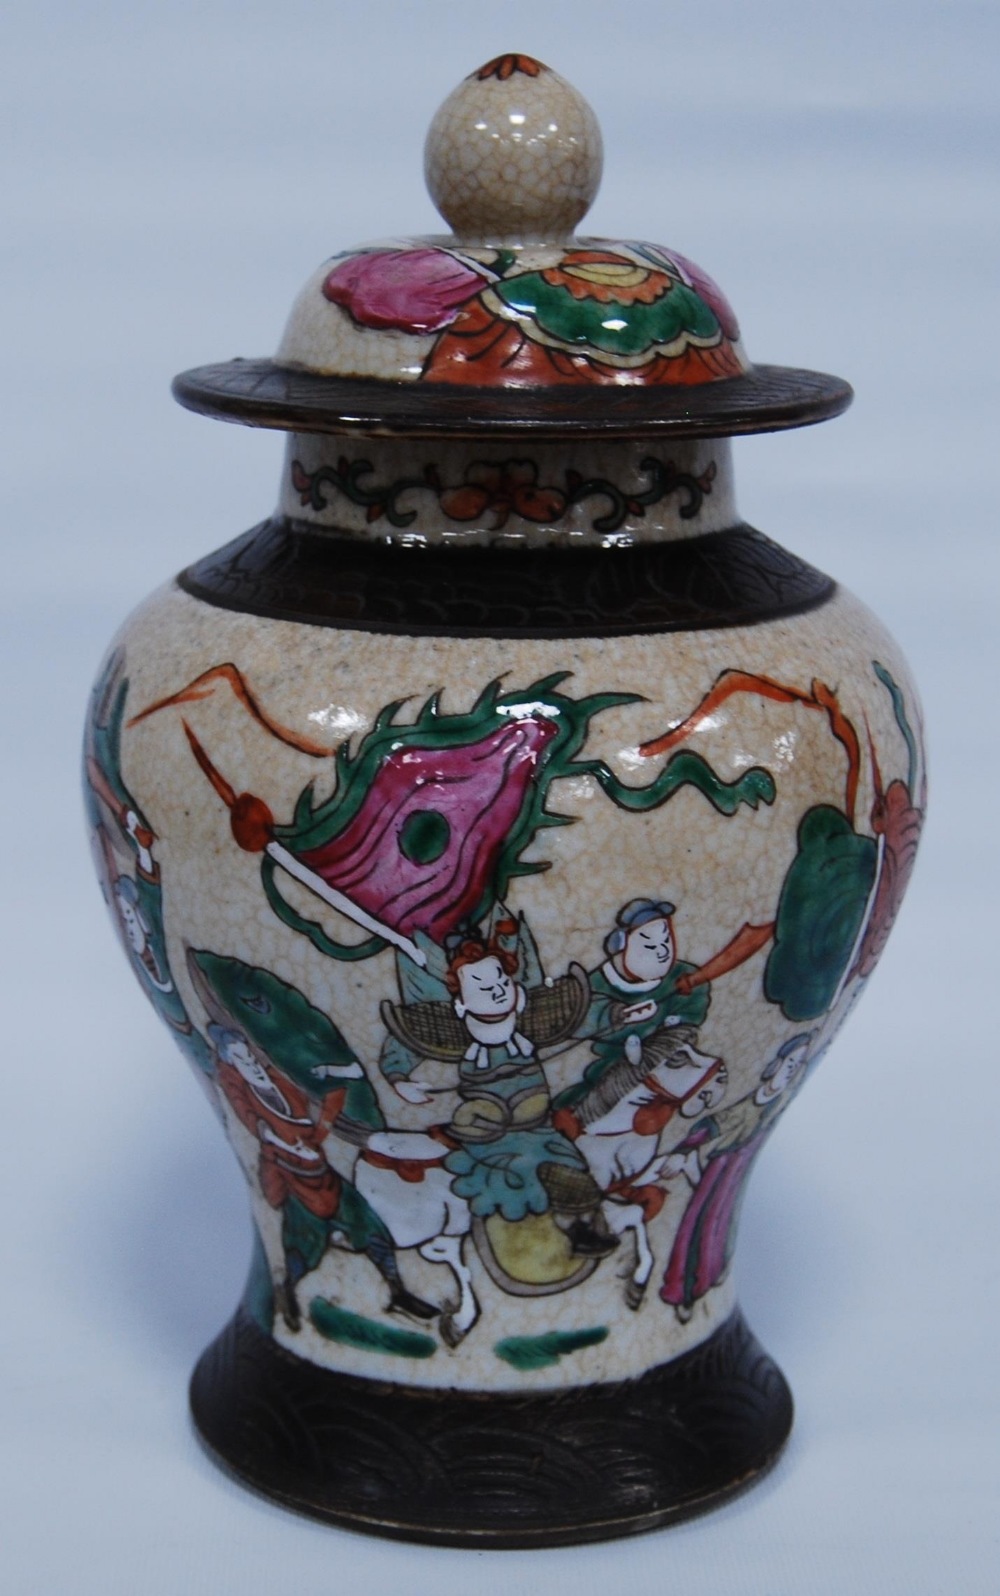 Pair of Chinese crackle glazed baluster vases and covers (20th century) decorated with battle scenes - Image 11 of 14